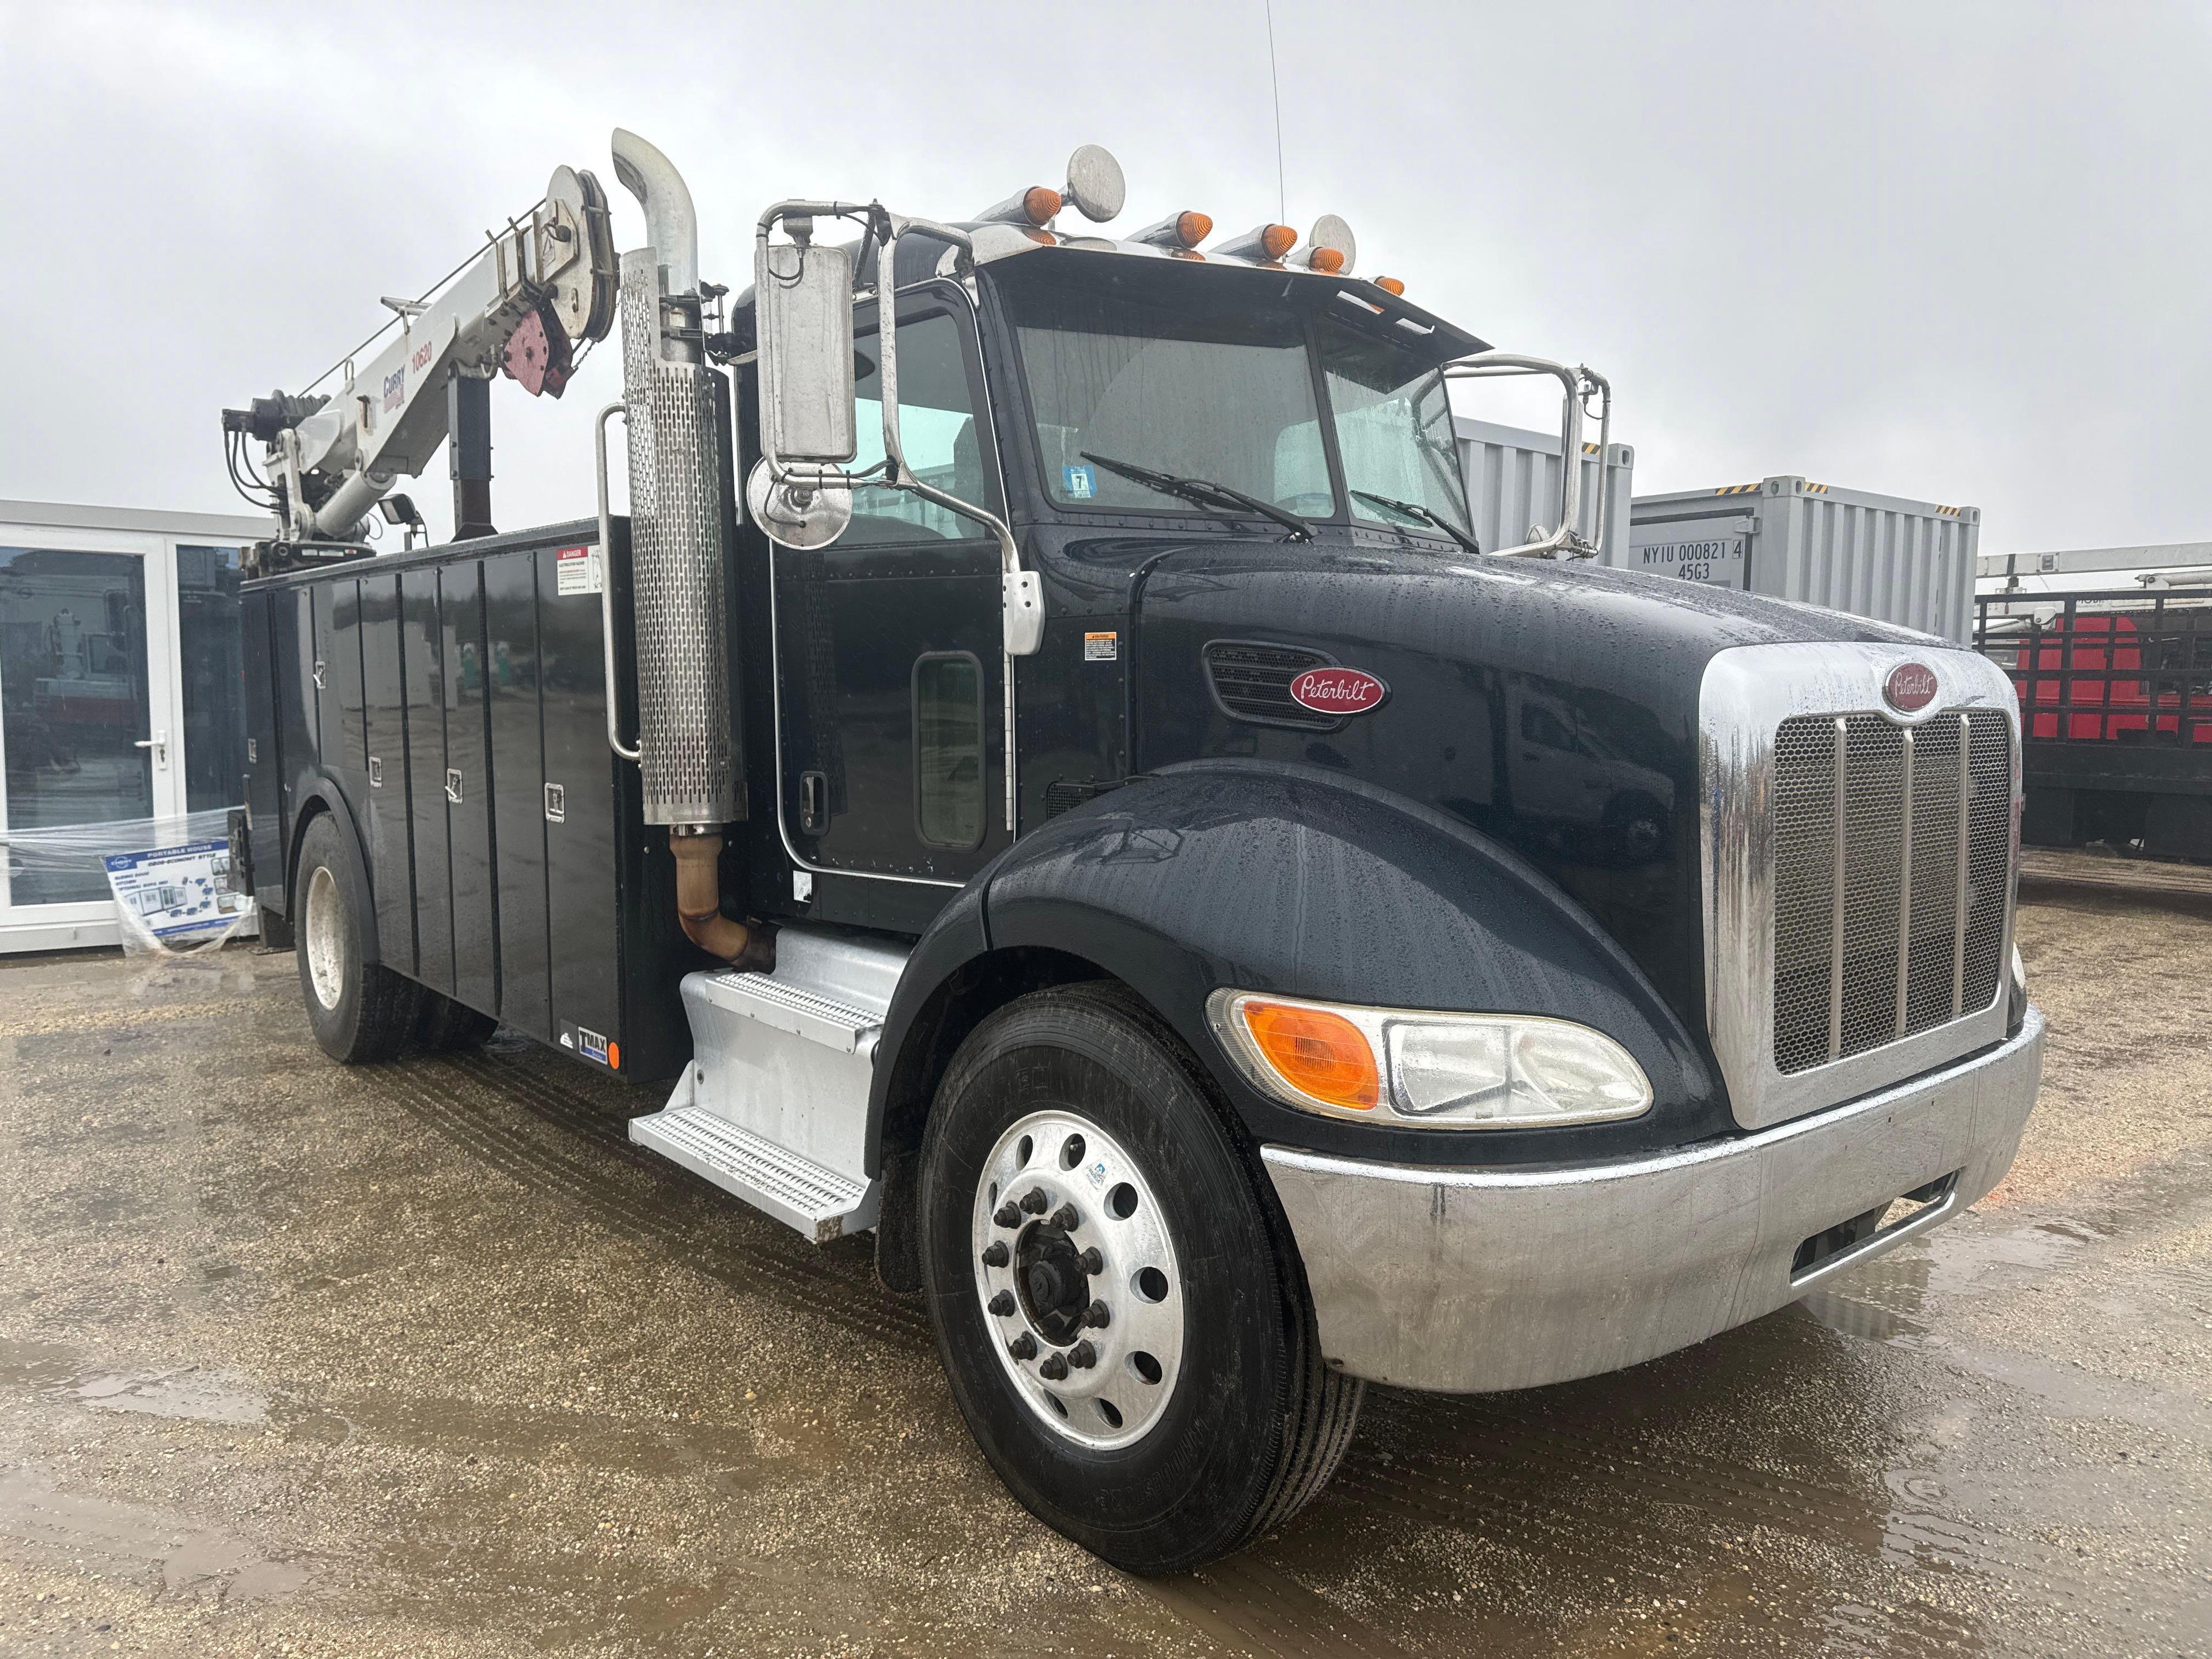 2014 PETERBILT 337 SERVICE TRUCK VN:2NP2HM7X8EM244929 powered by diesel engine, equipped with power